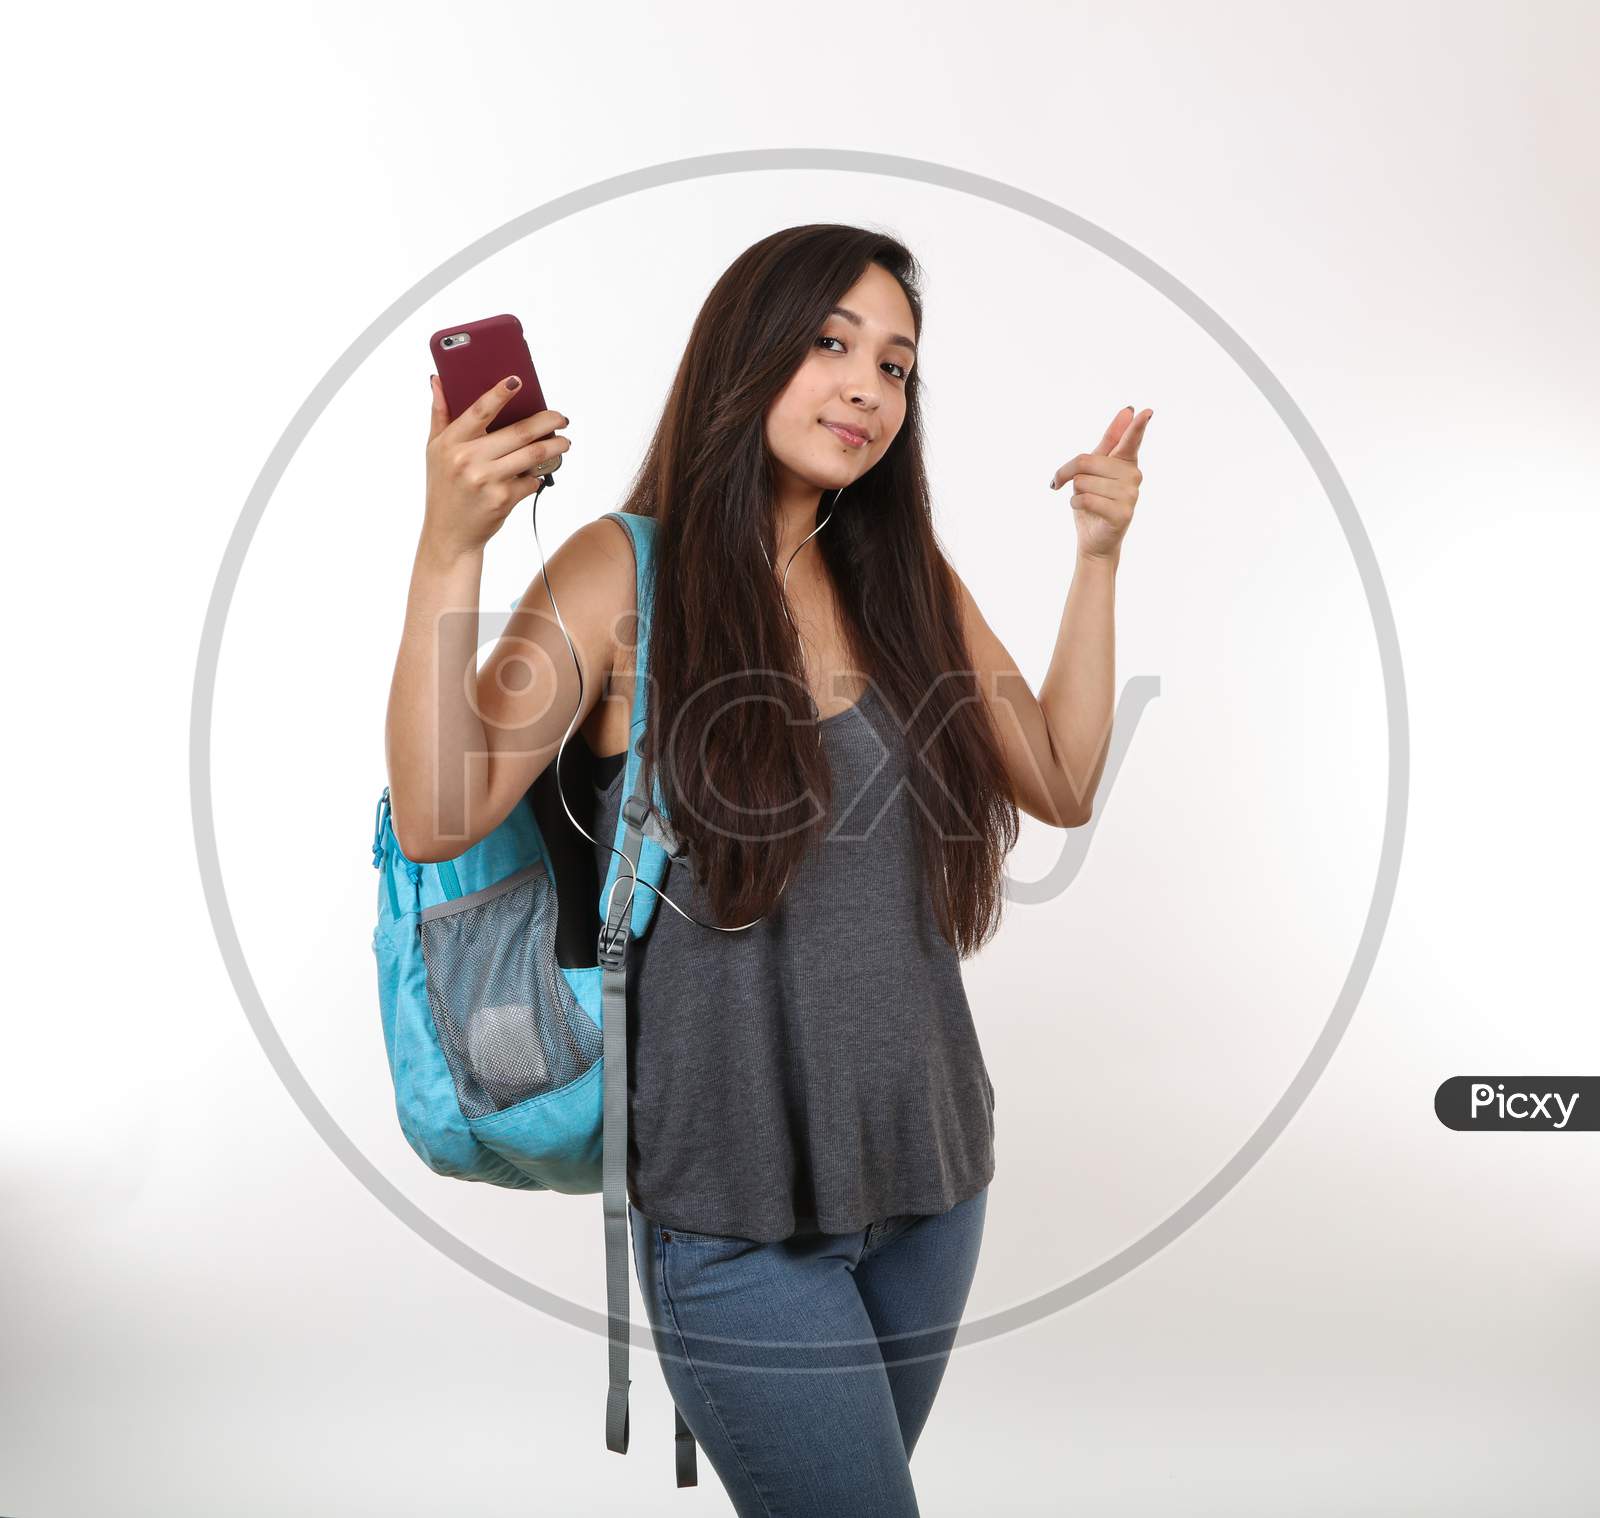 A Young Pretty Female Student Holds Her Phone As She Points Her Finger.  Student Is Also Wearing Earphones And A Backpack.